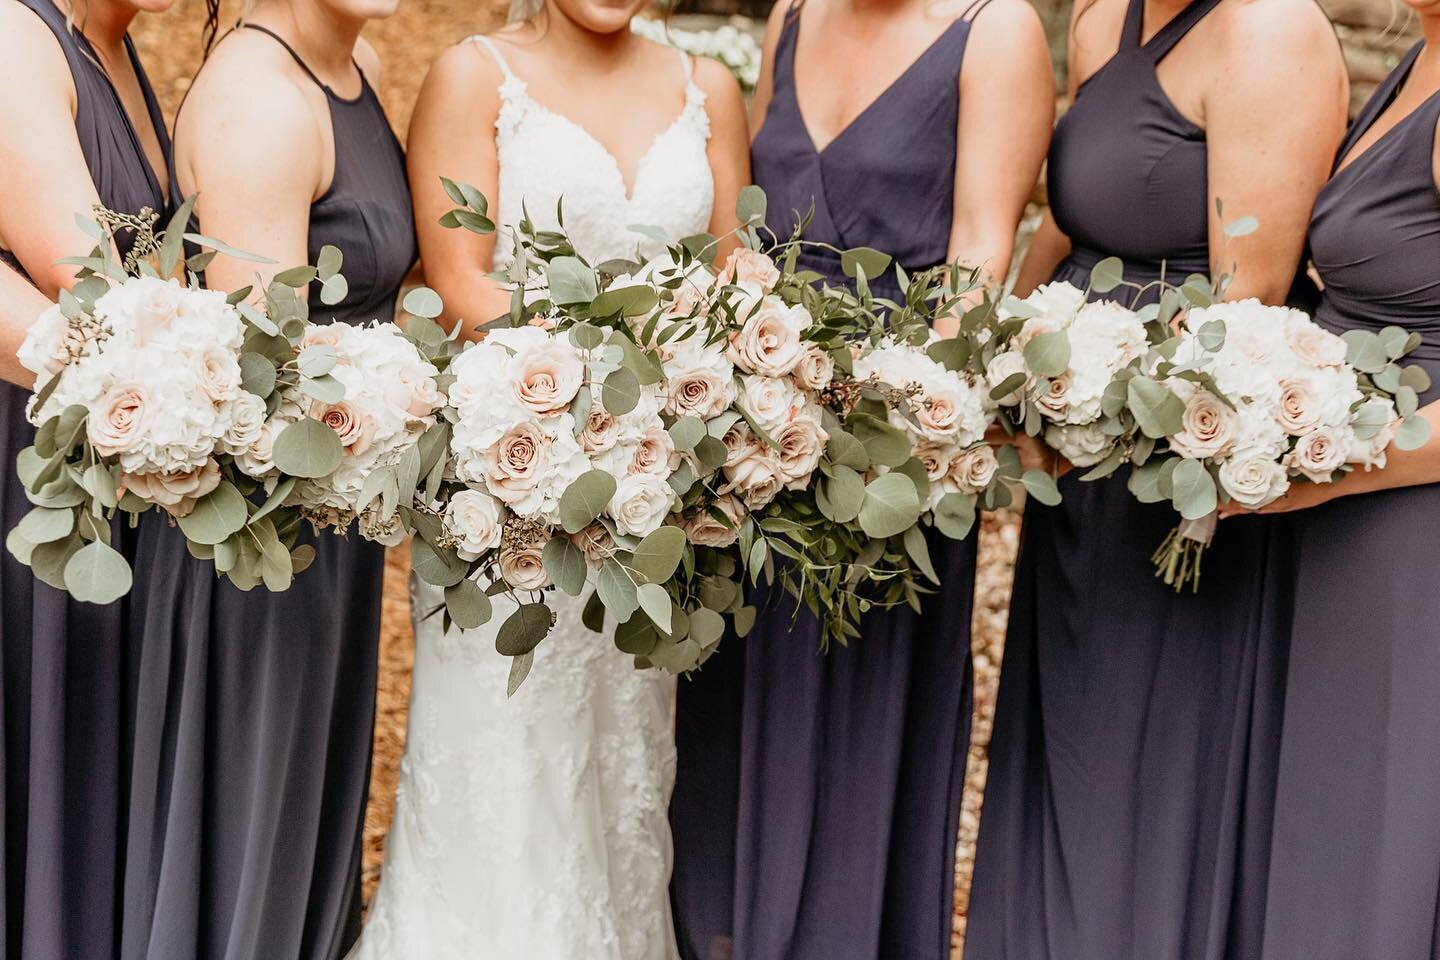 Aren&rsquo;t these bouquets so beautiful?! I love a good Bride Tribe photo!